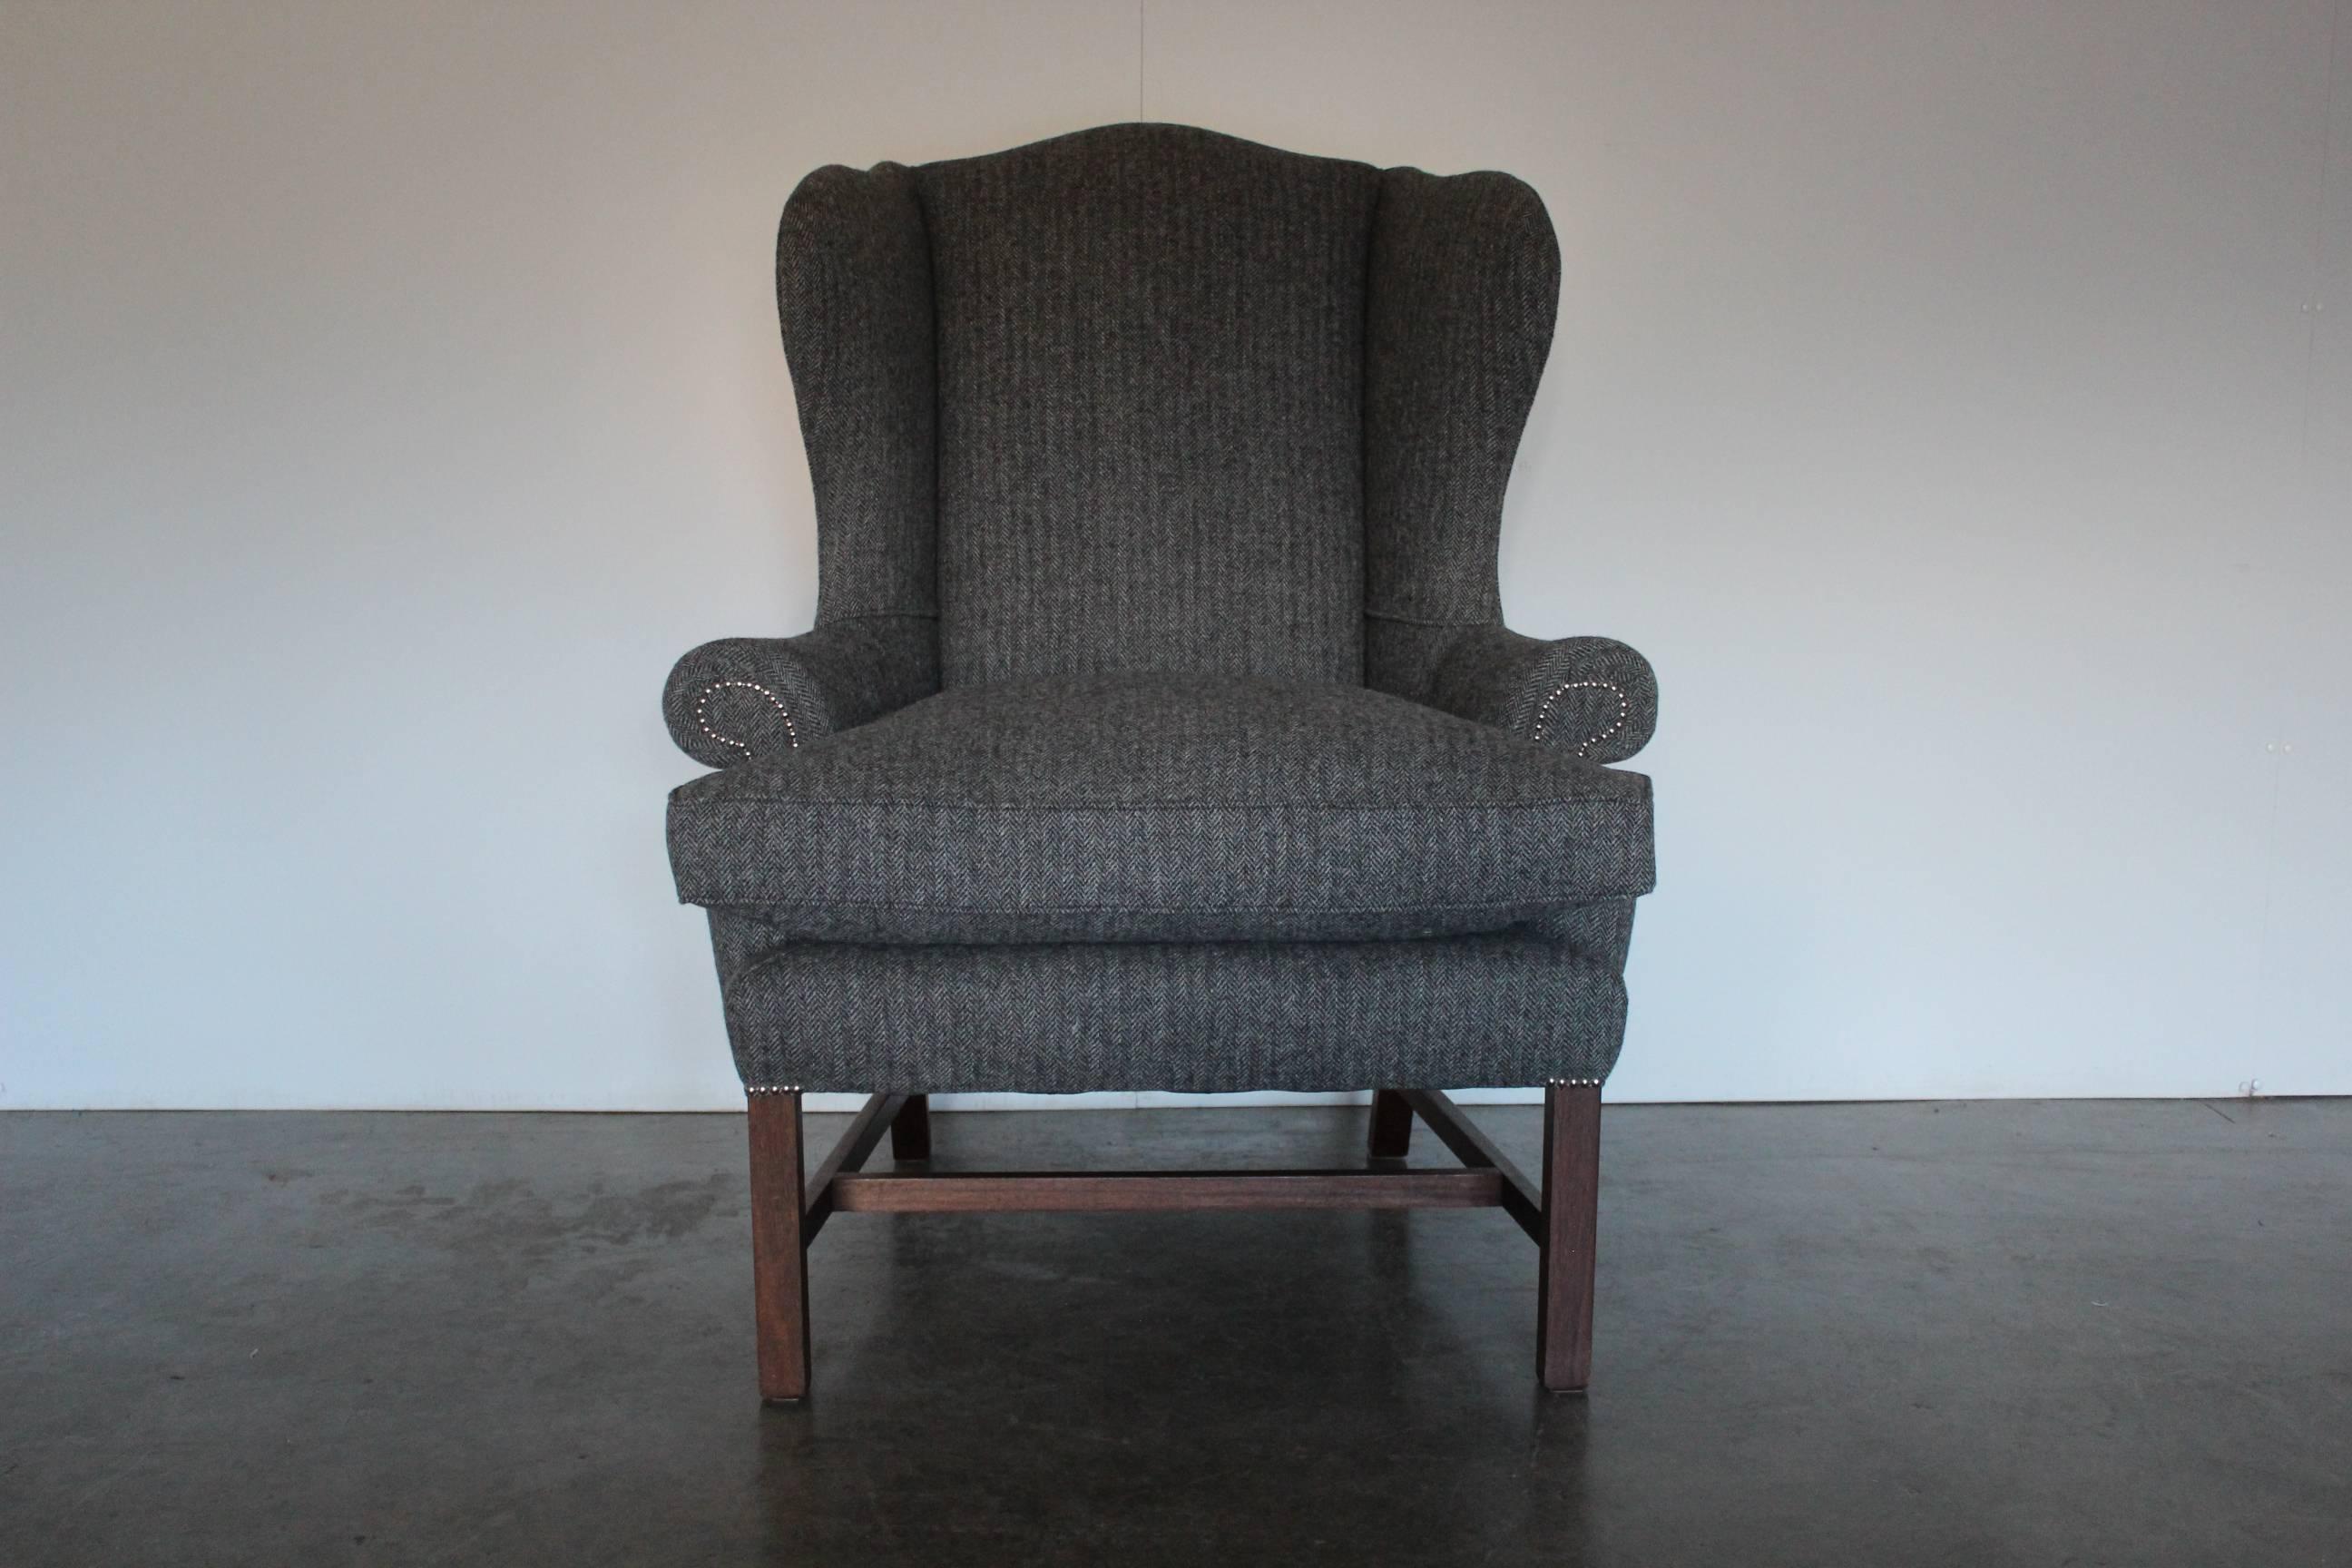 On offer on this occasion is an incredibly rare, large Ralph Lauren “Devonshire” wing-back armchair, dressed in a peerless, top-grade, Ralph Lauren Woollen Herringbone fabric in a myriad of beautiful dark black and grey tones, and with